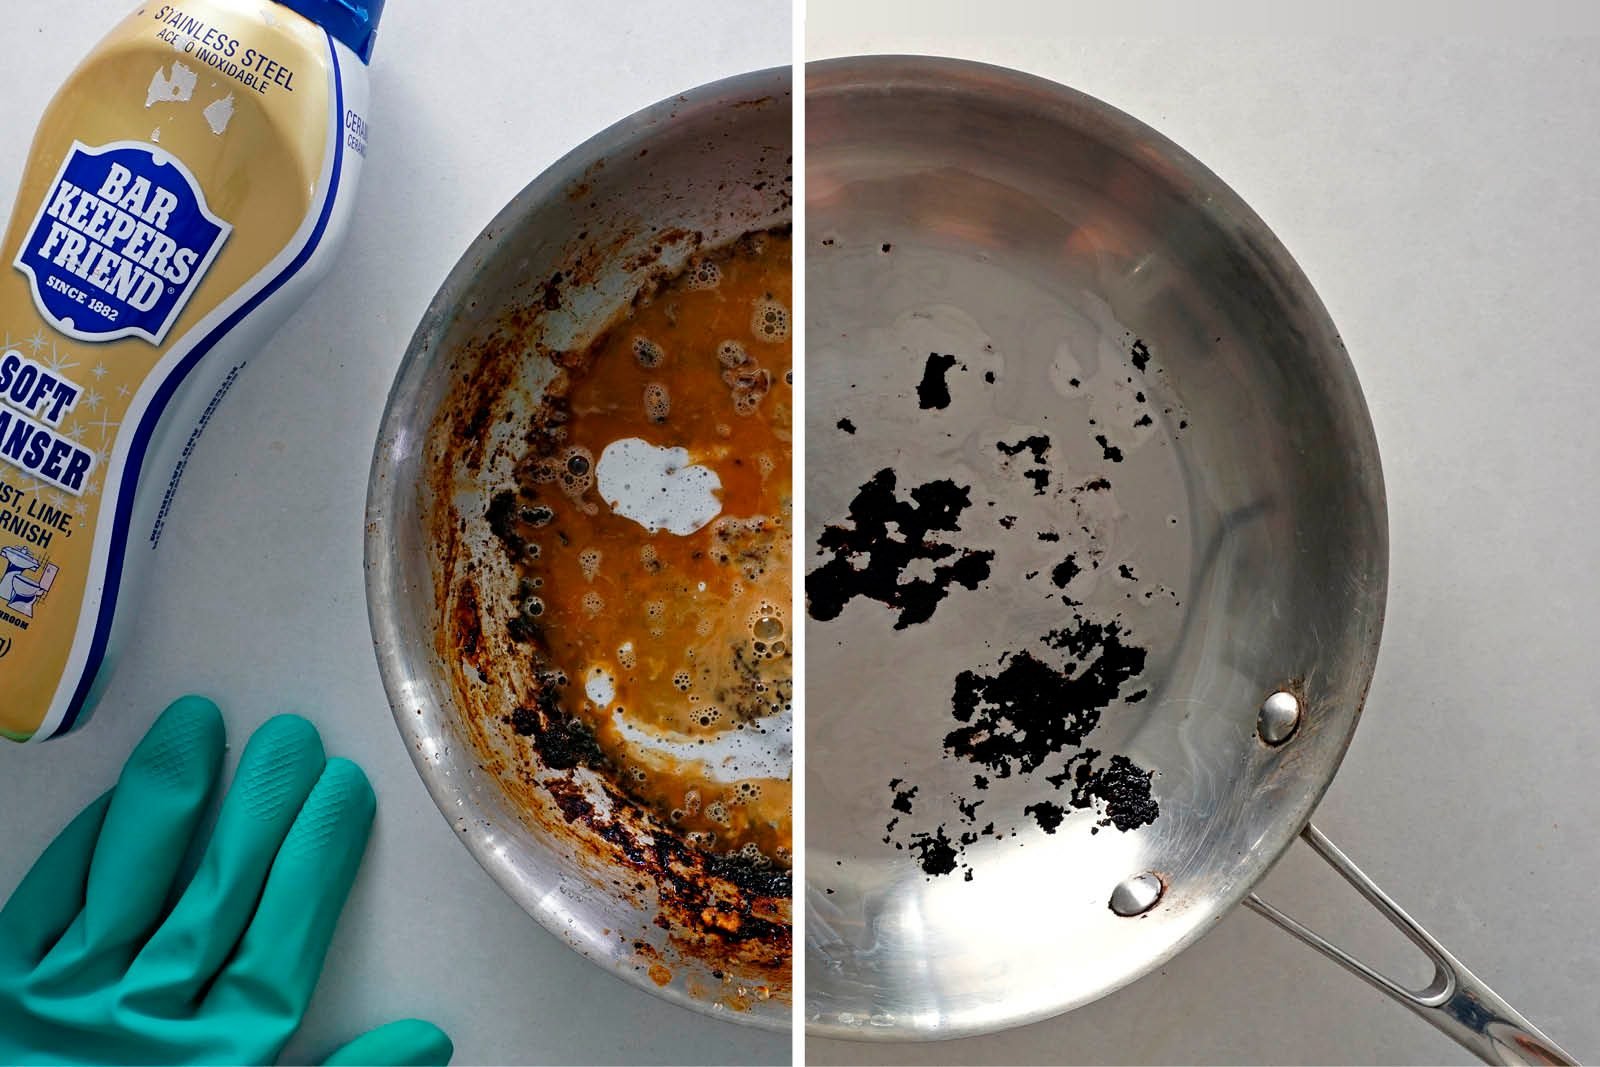 How to Clean Up Grease & Other Cooking Stains